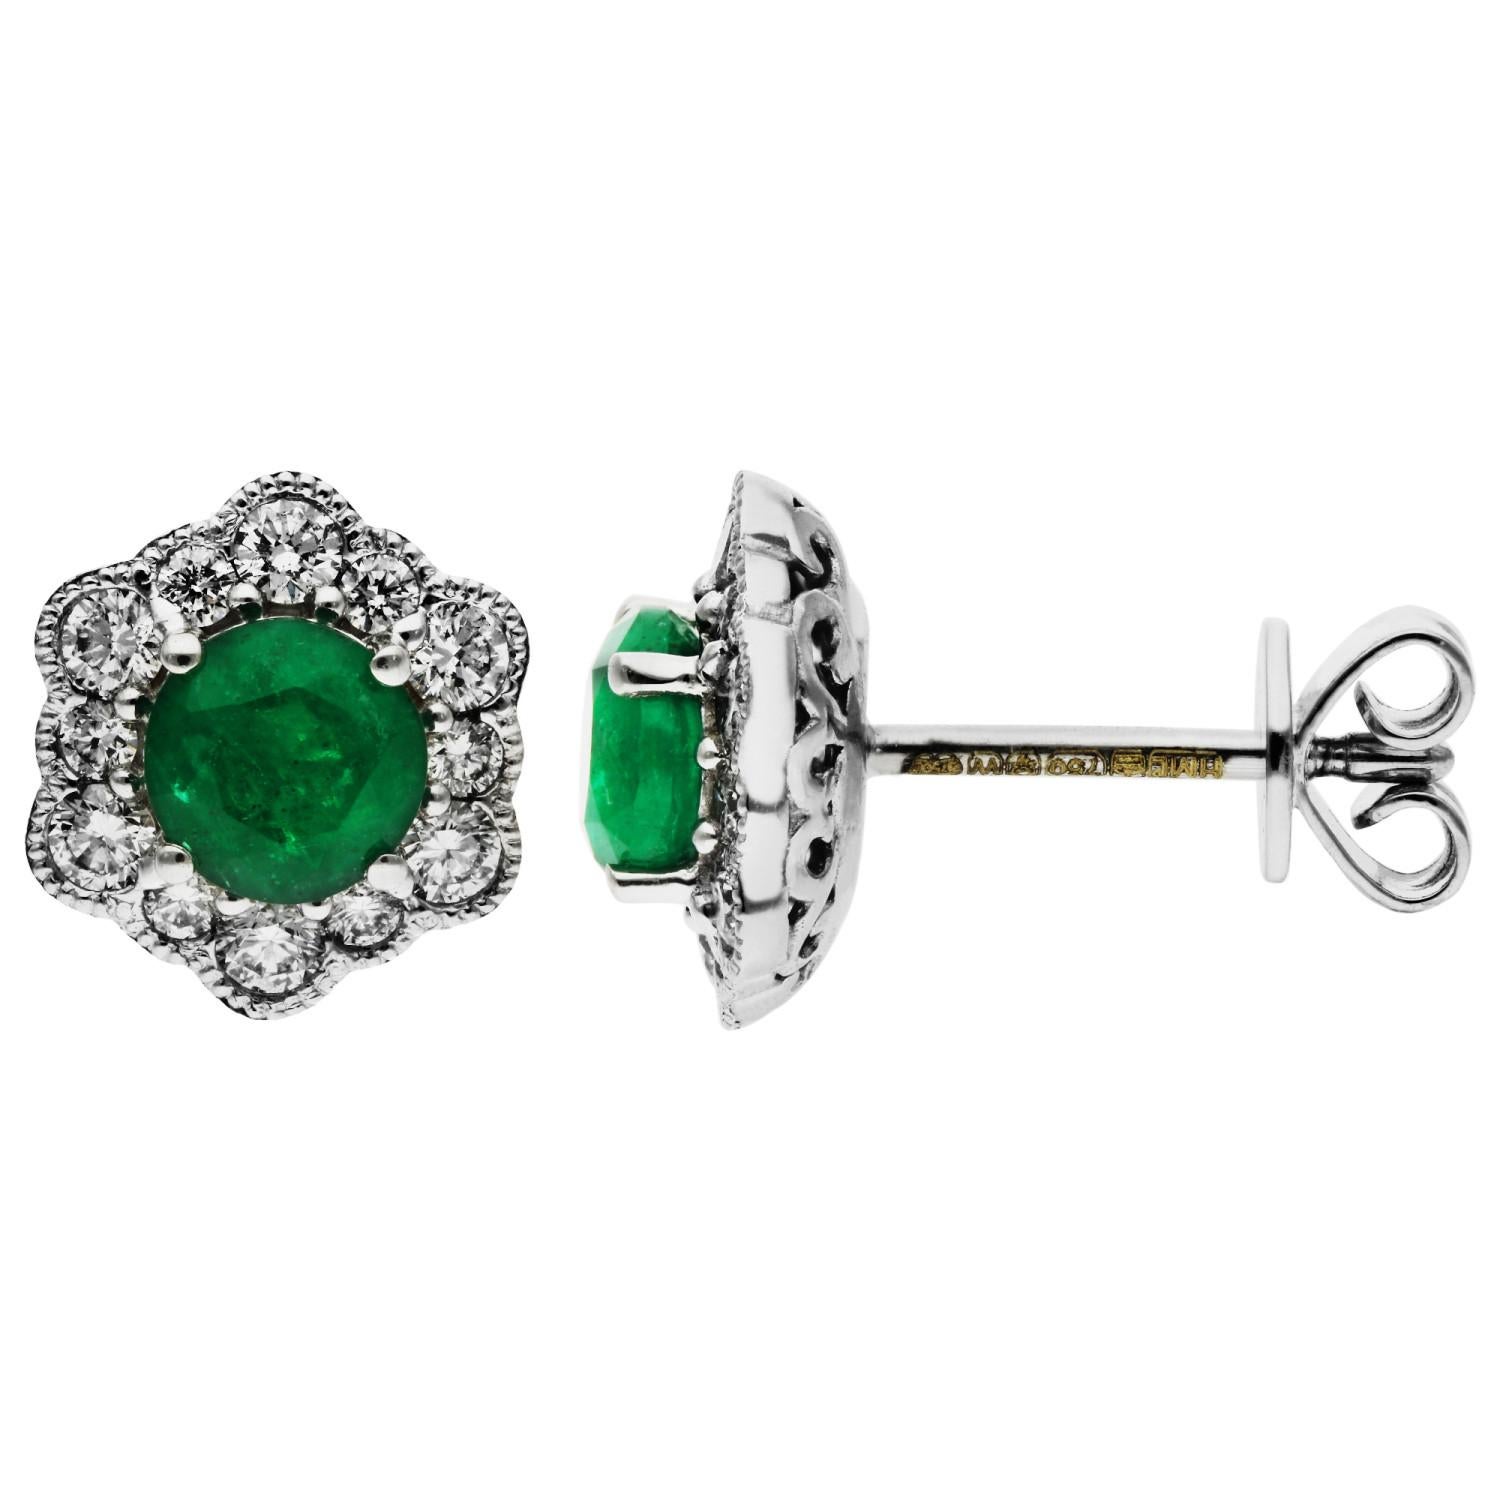 18ct White Gold 0.95ct Emerald & 0.49ct Diamond Flower Stud Earrings

Introducing our stunning 18ct White Gold Emerald & Diamond Flower Stud Earrings, a dazzling union of nature's splendour and exquisite craftsmanship. Each earring features a